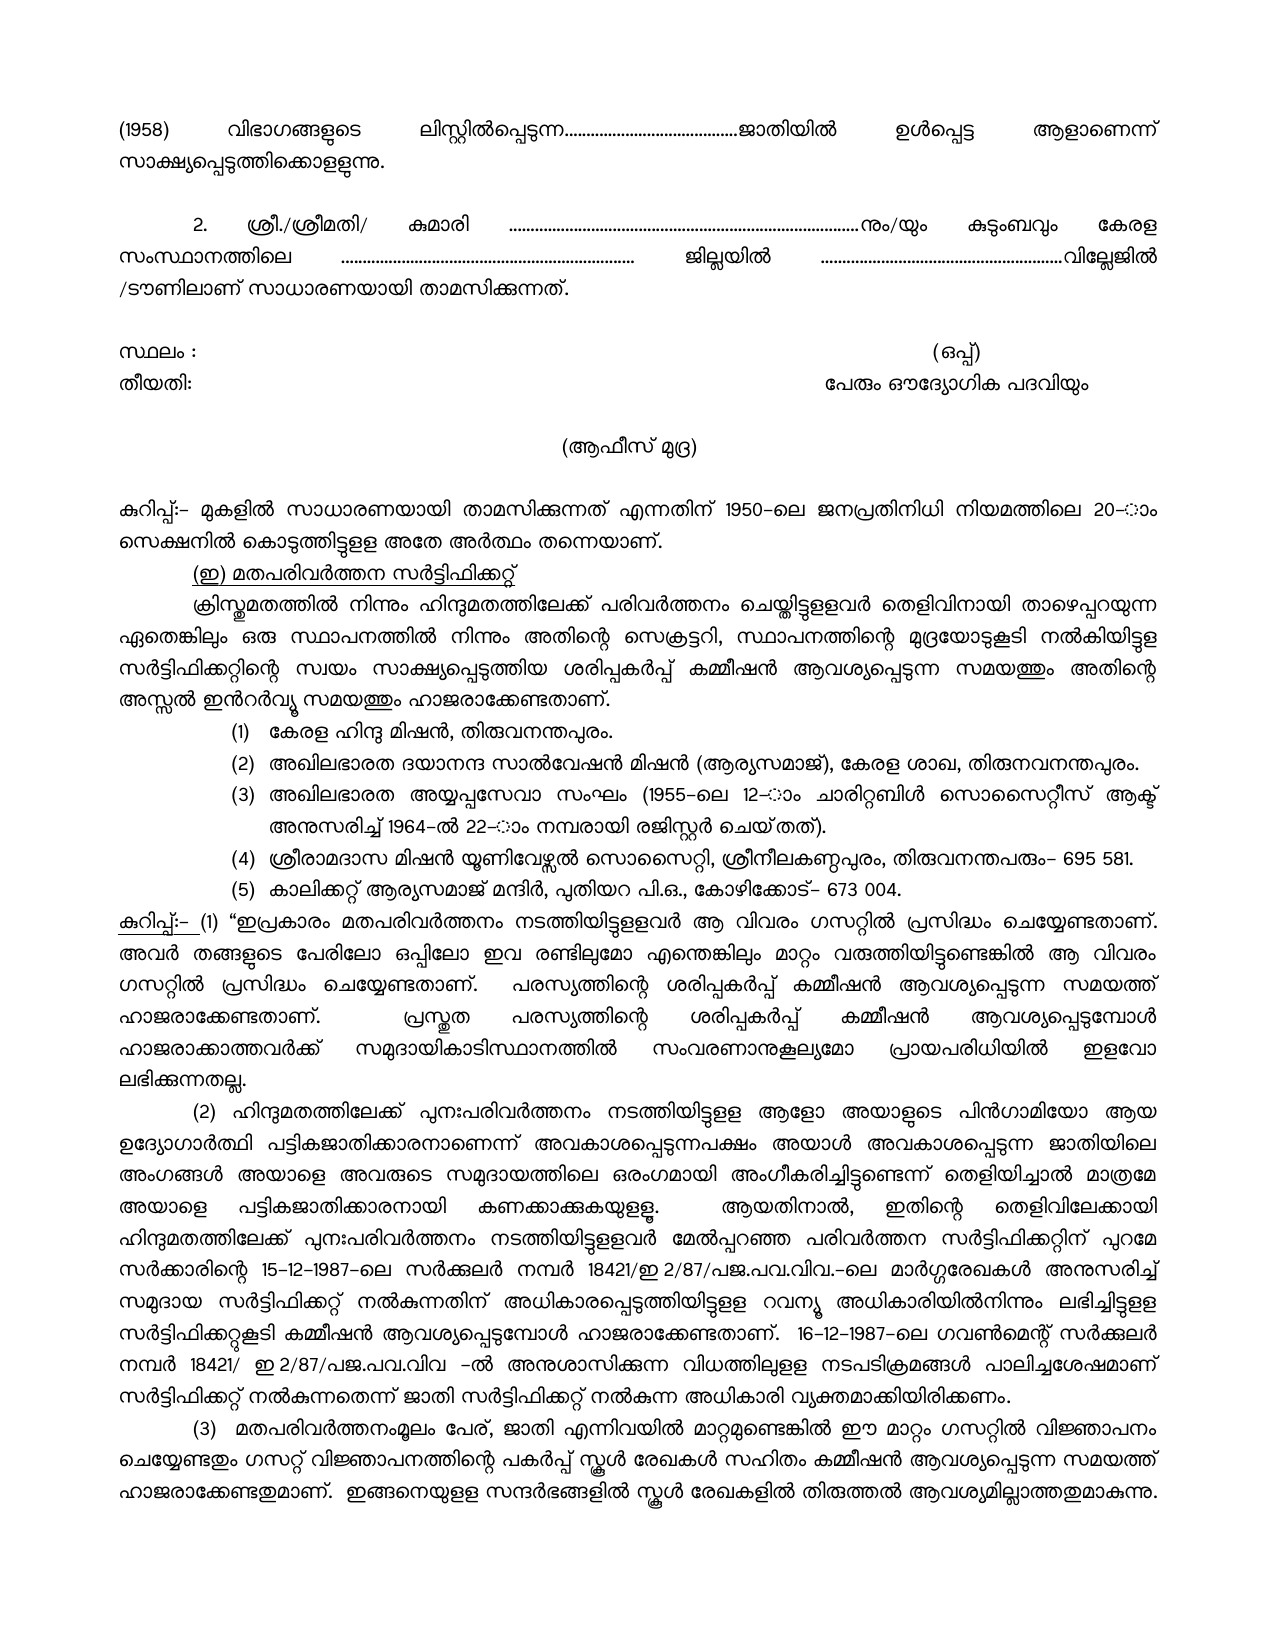 General Conditions and Certificate Formats in Malayalam - Notification Image 16